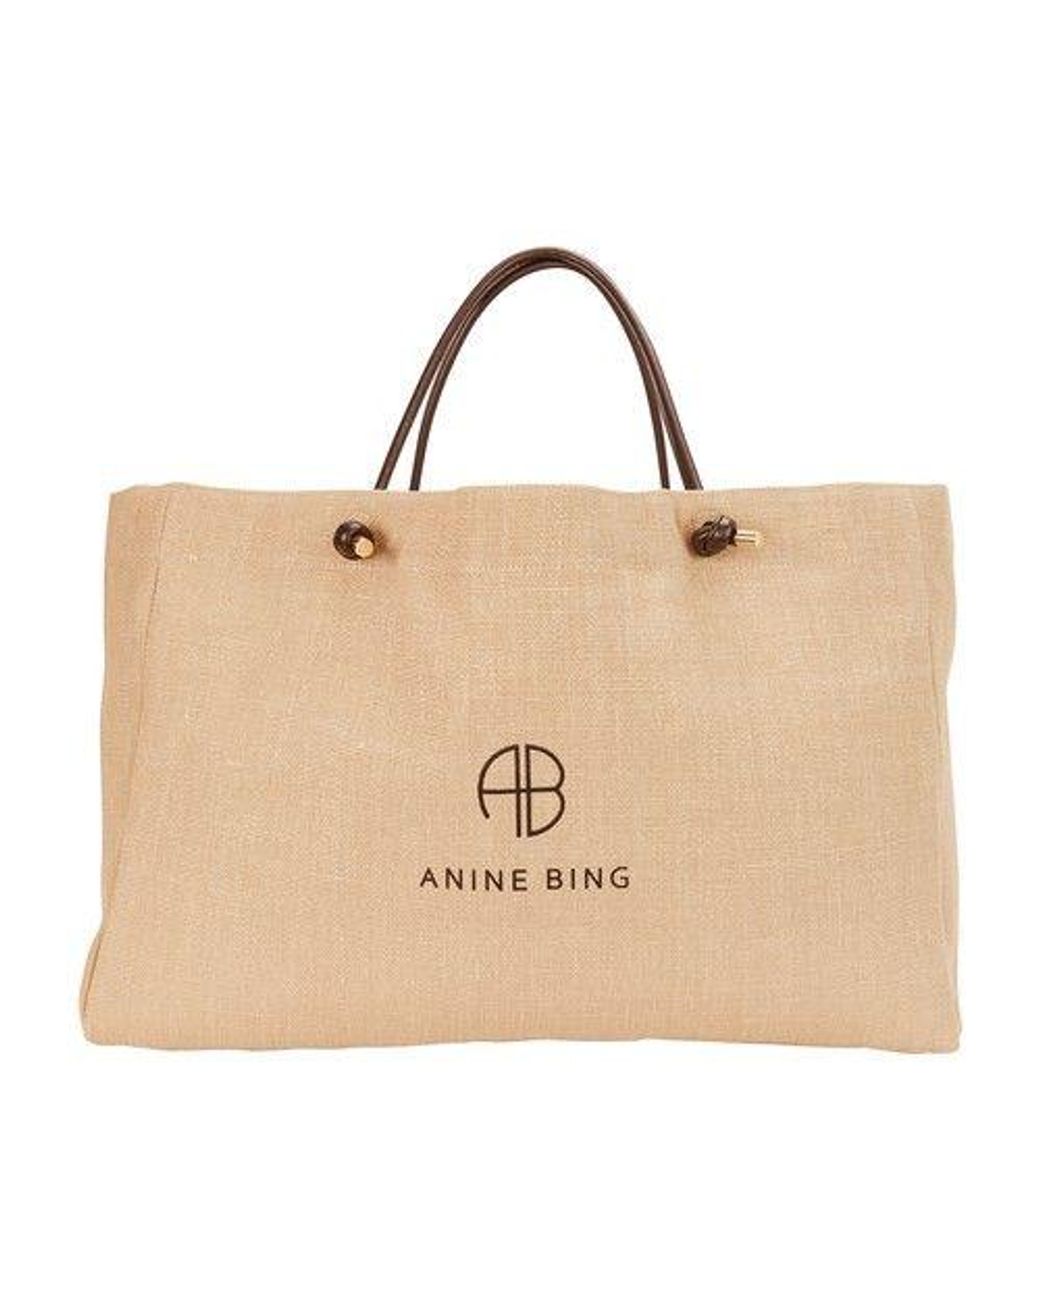  ANINE BING Women's Large Rio Tote, Sand, Tan, One Size :  Clothing, Shoes & Jewelry